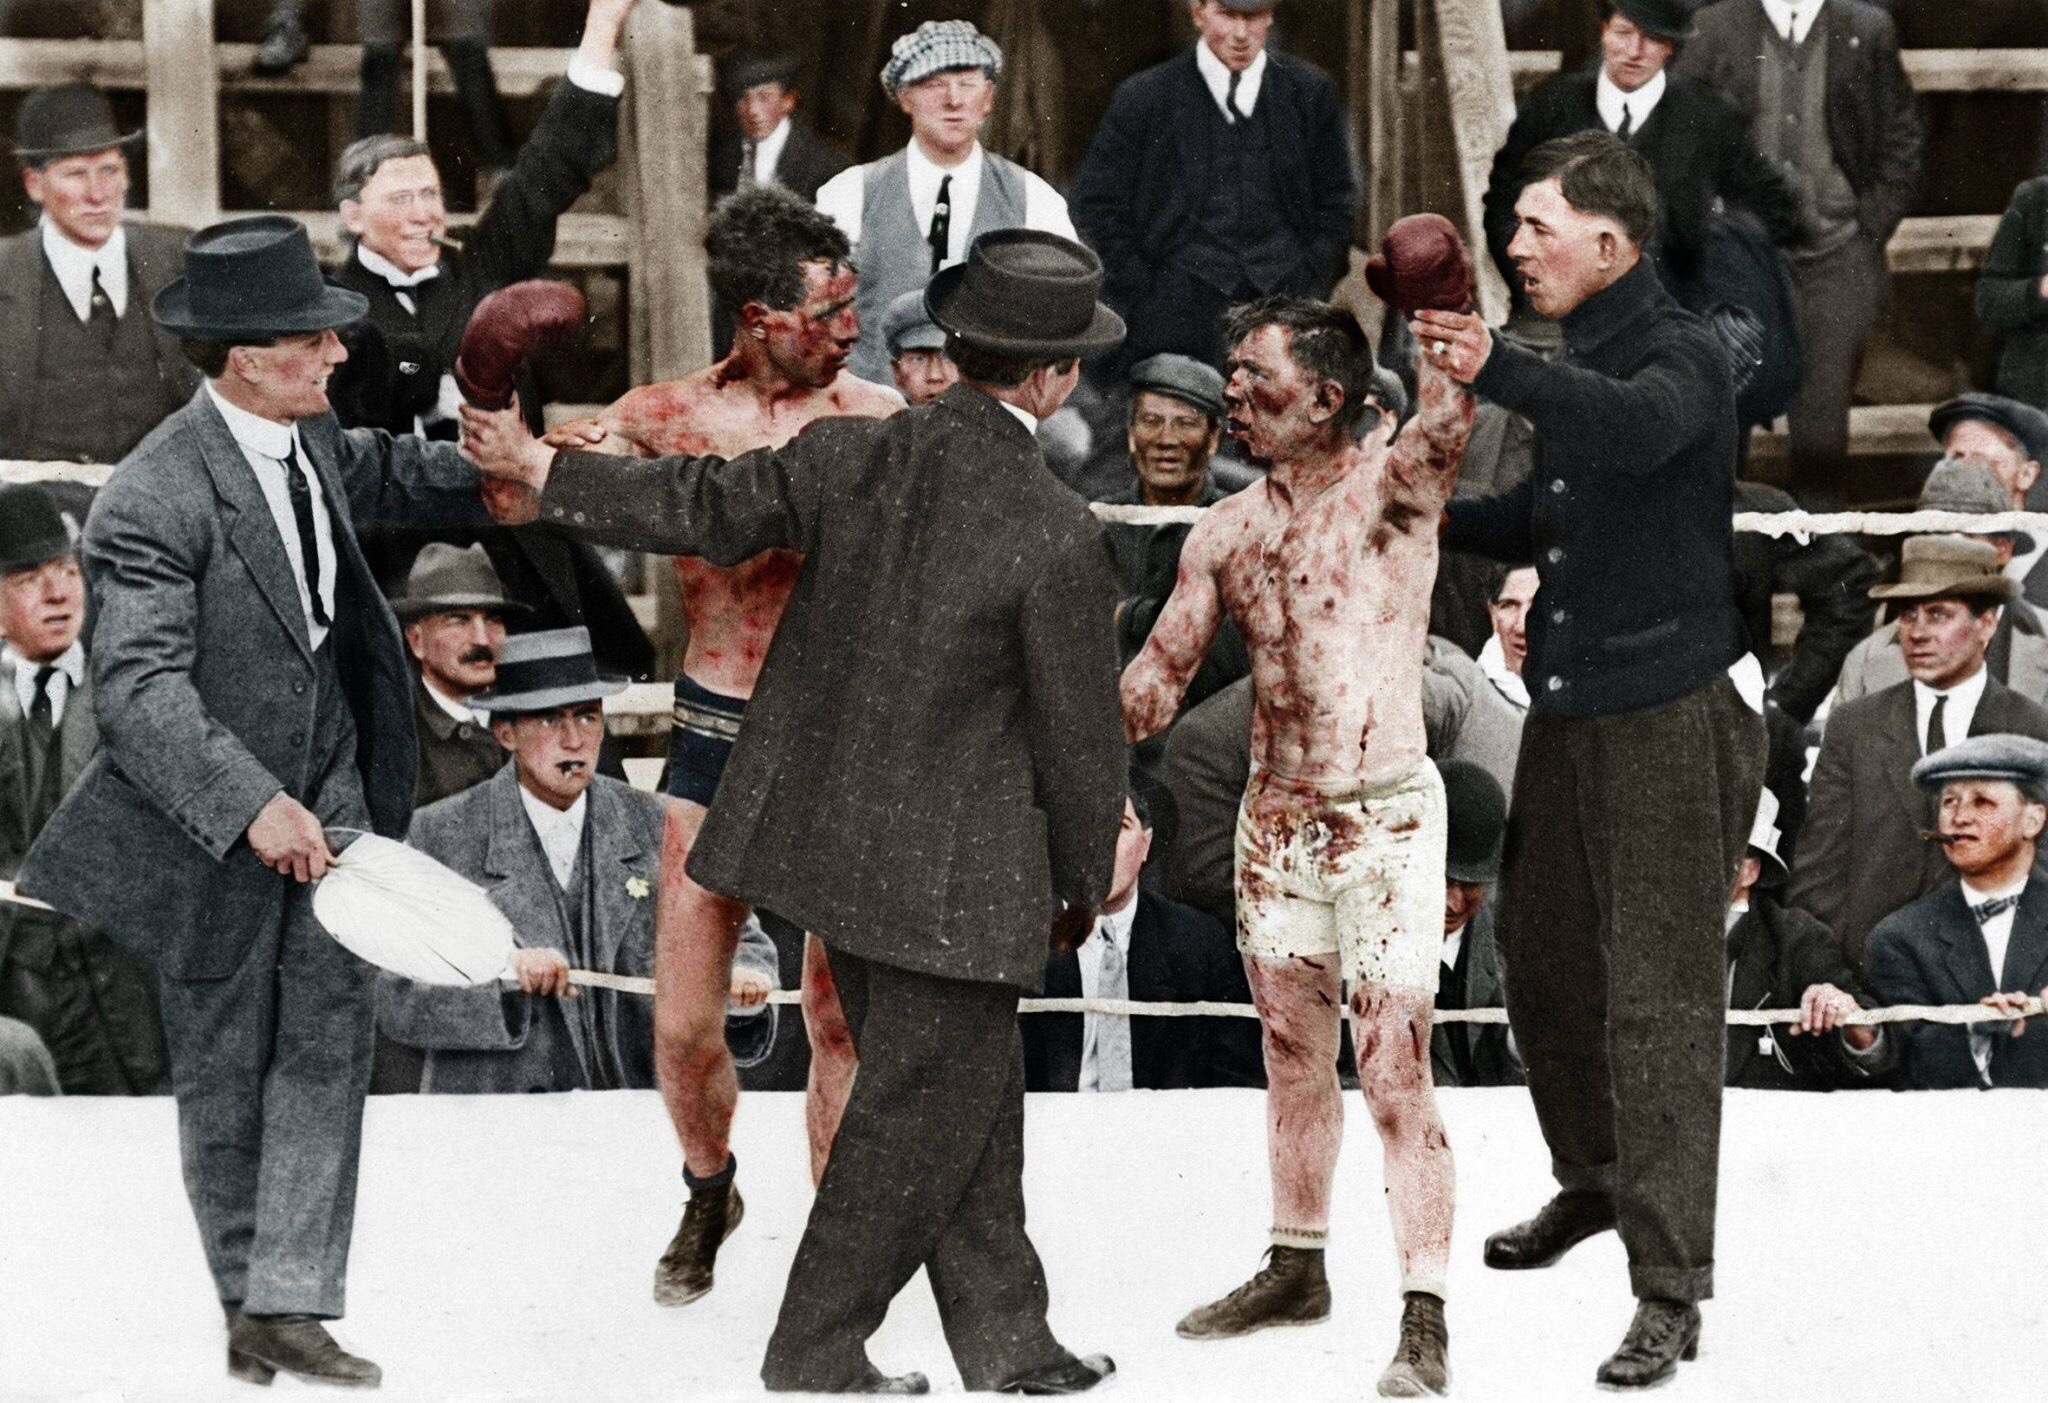 Restored photo of a boxing match from 1913 (Roy Campbell vs. Dick Hyland)